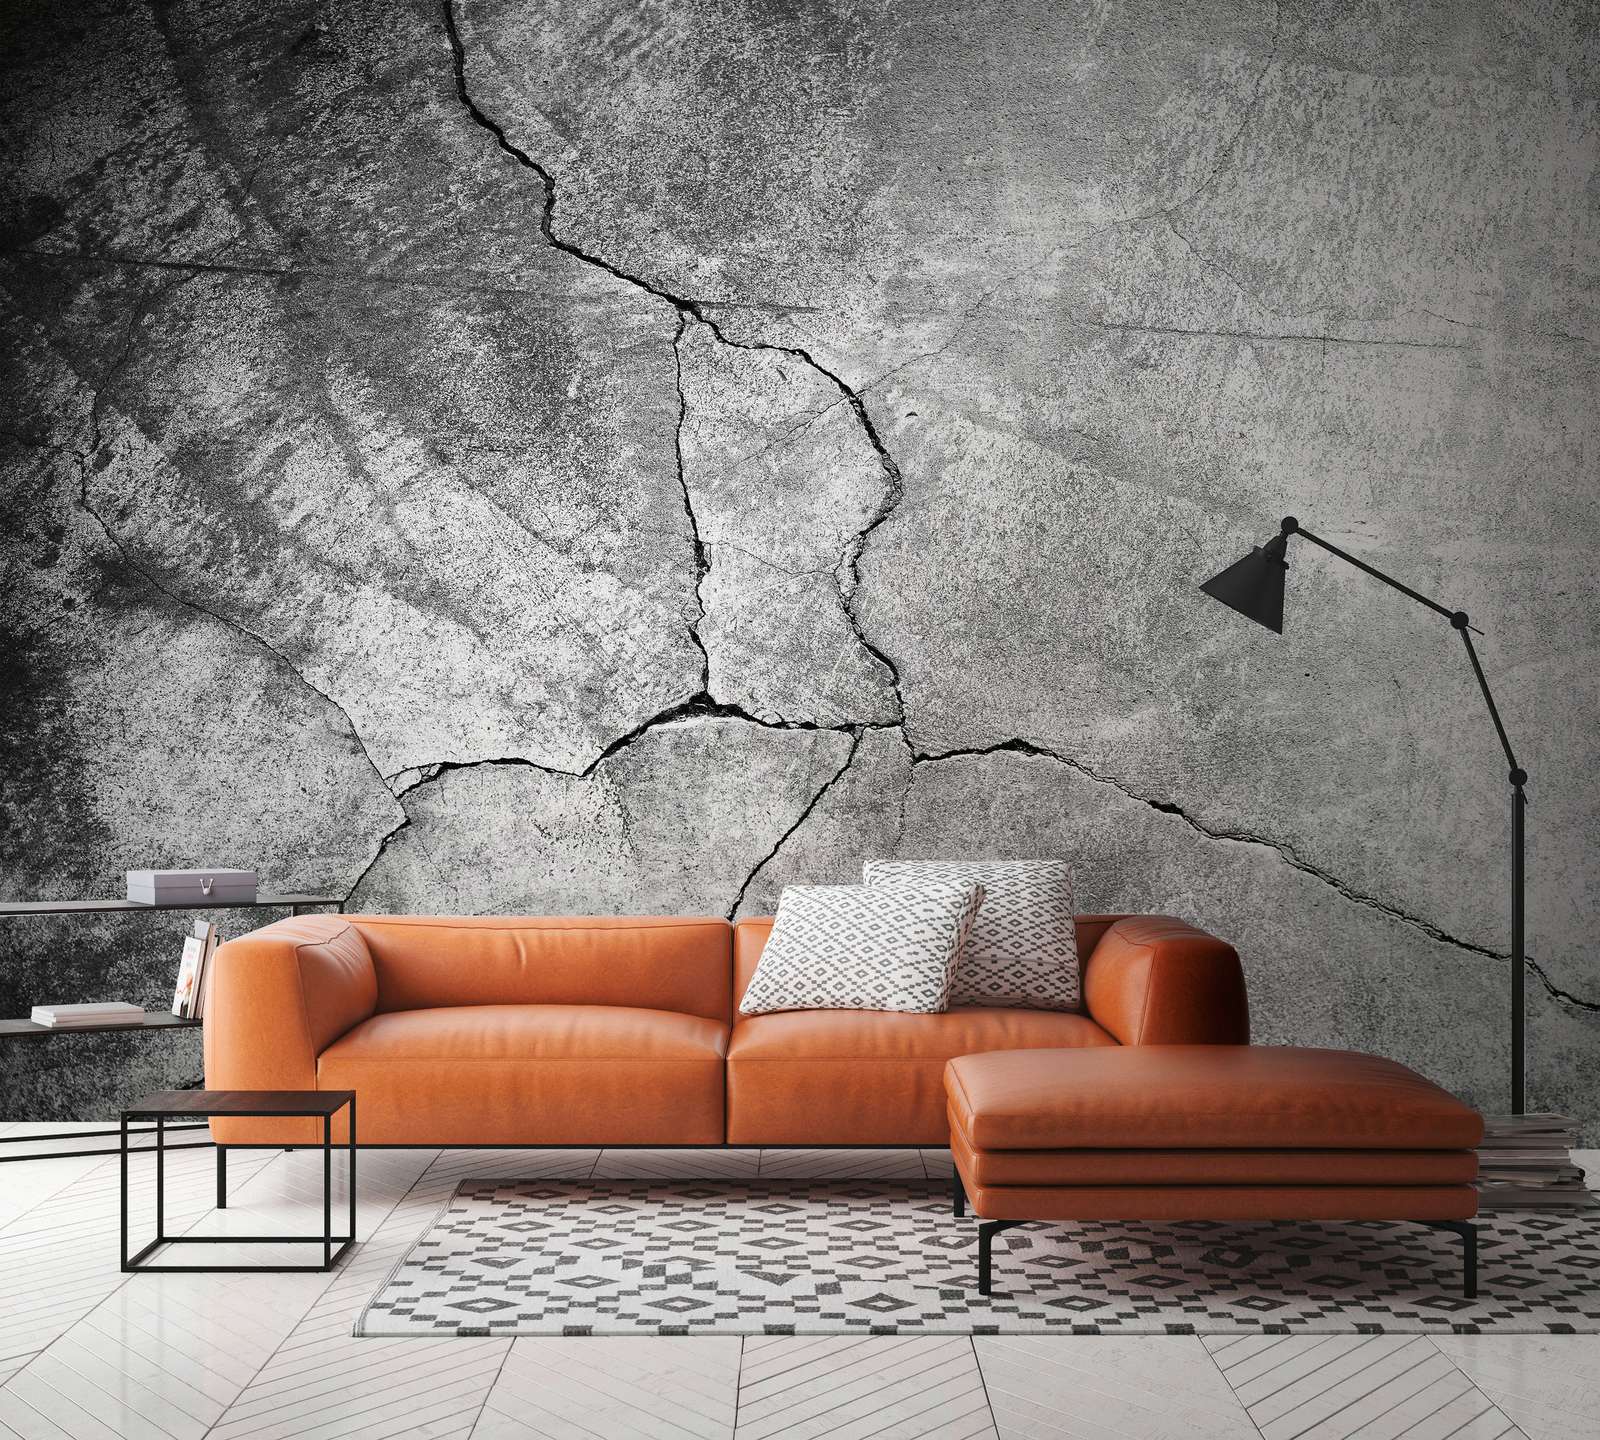             Photo wallpaper concrete wall with crack in 3D optics - grey
        